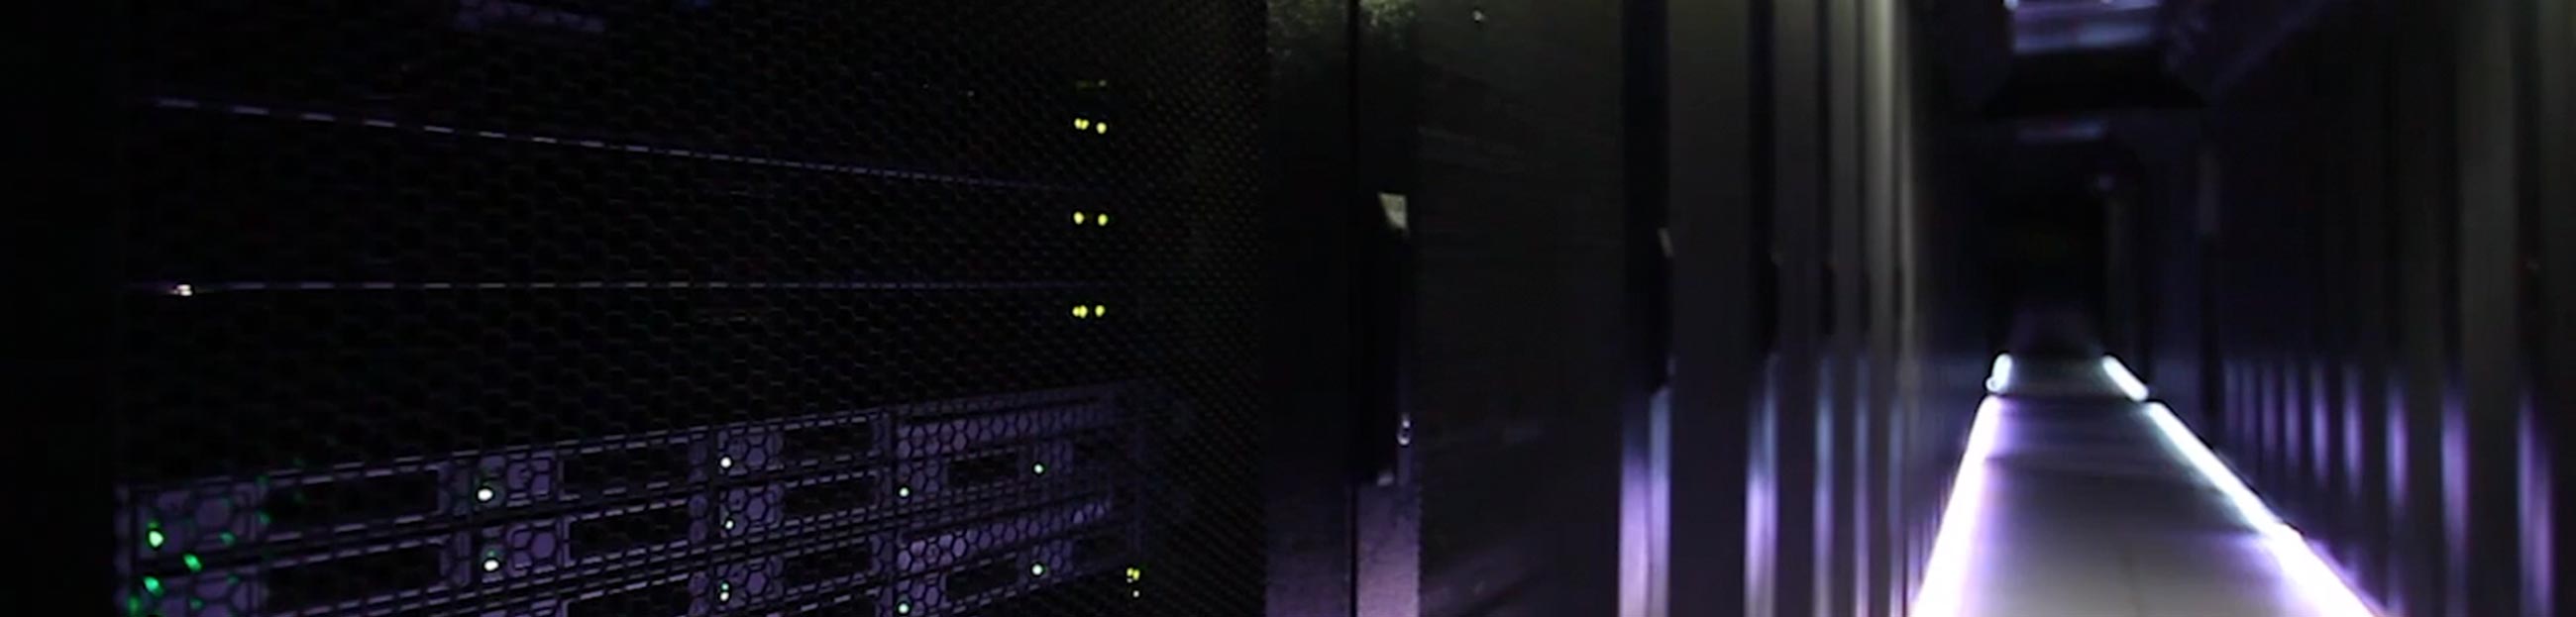 Micron21 are the technology innovators behind Australia's first Tier IV Data Centre